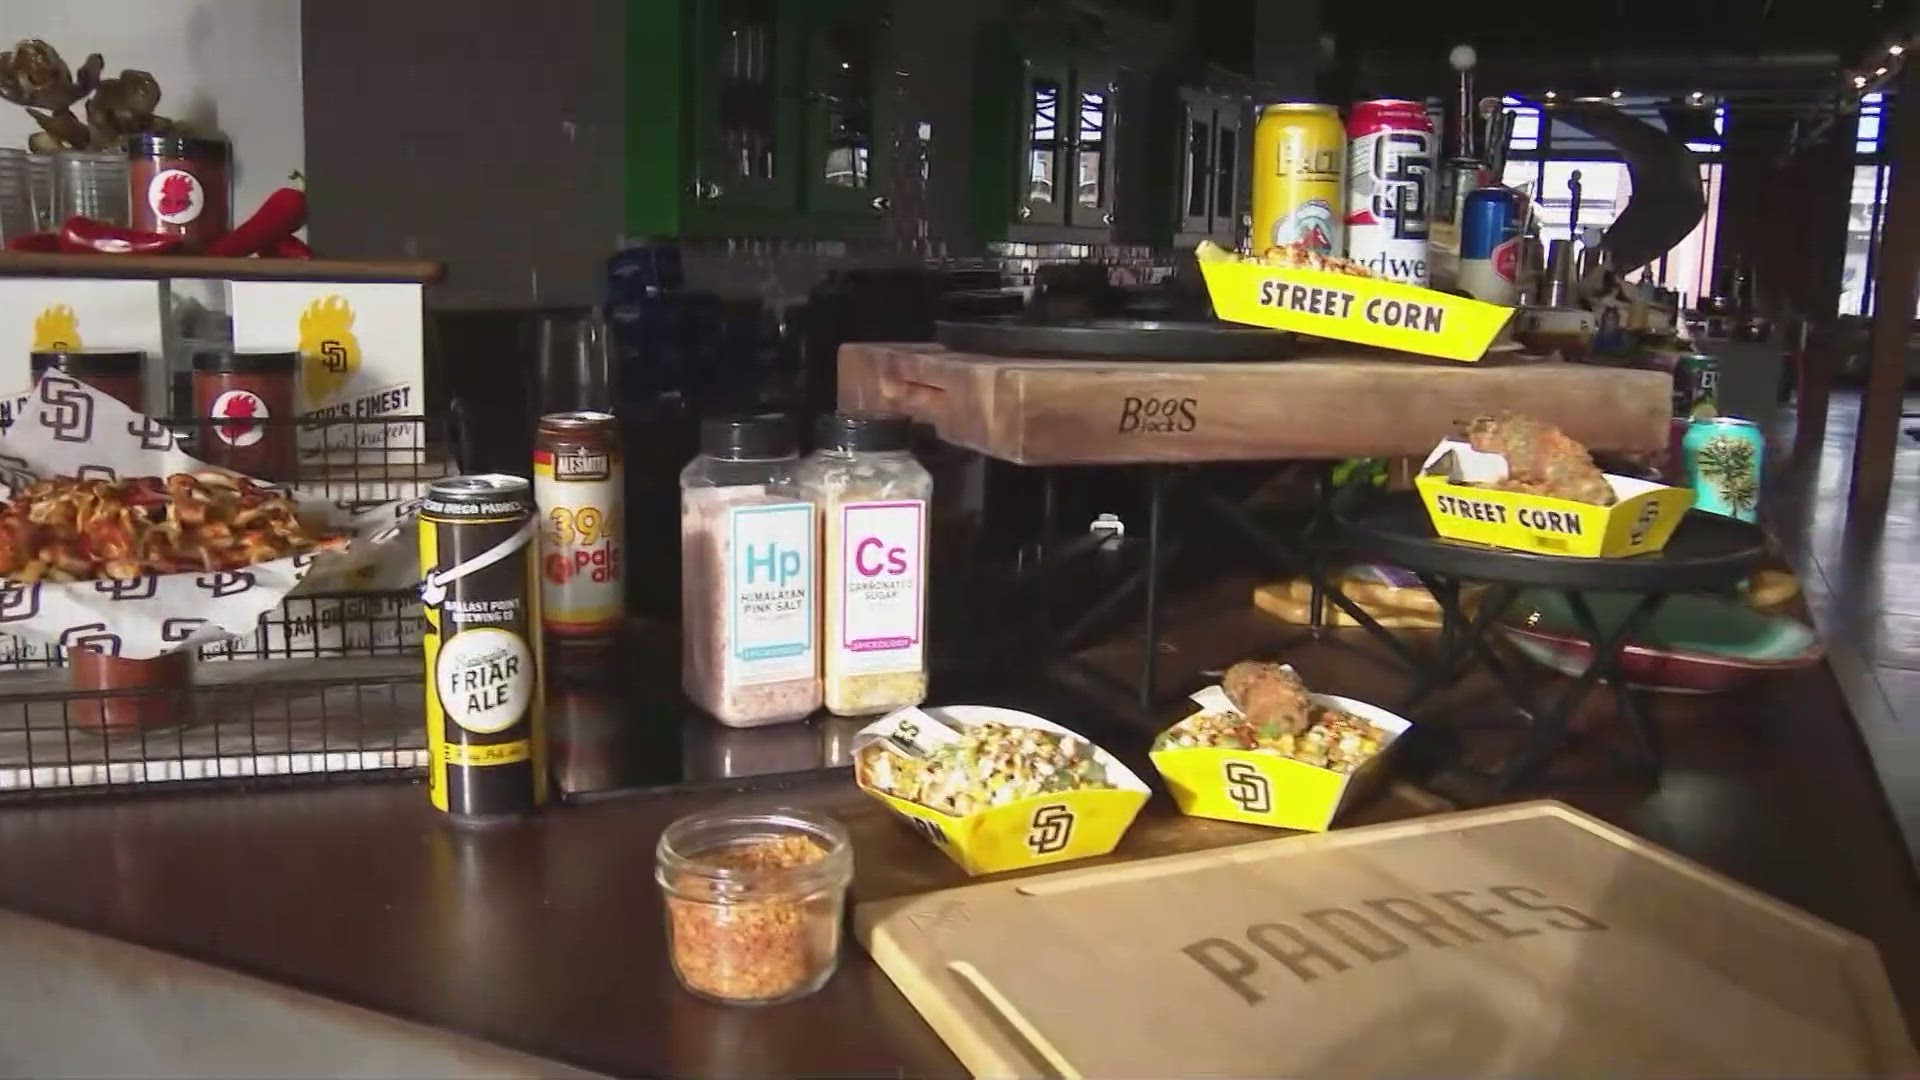 VP of Hospitality for the Padres, Josh Momberg talked about the new eats and drinks that can be enjoyed at the park as well as new merchandise that is available.